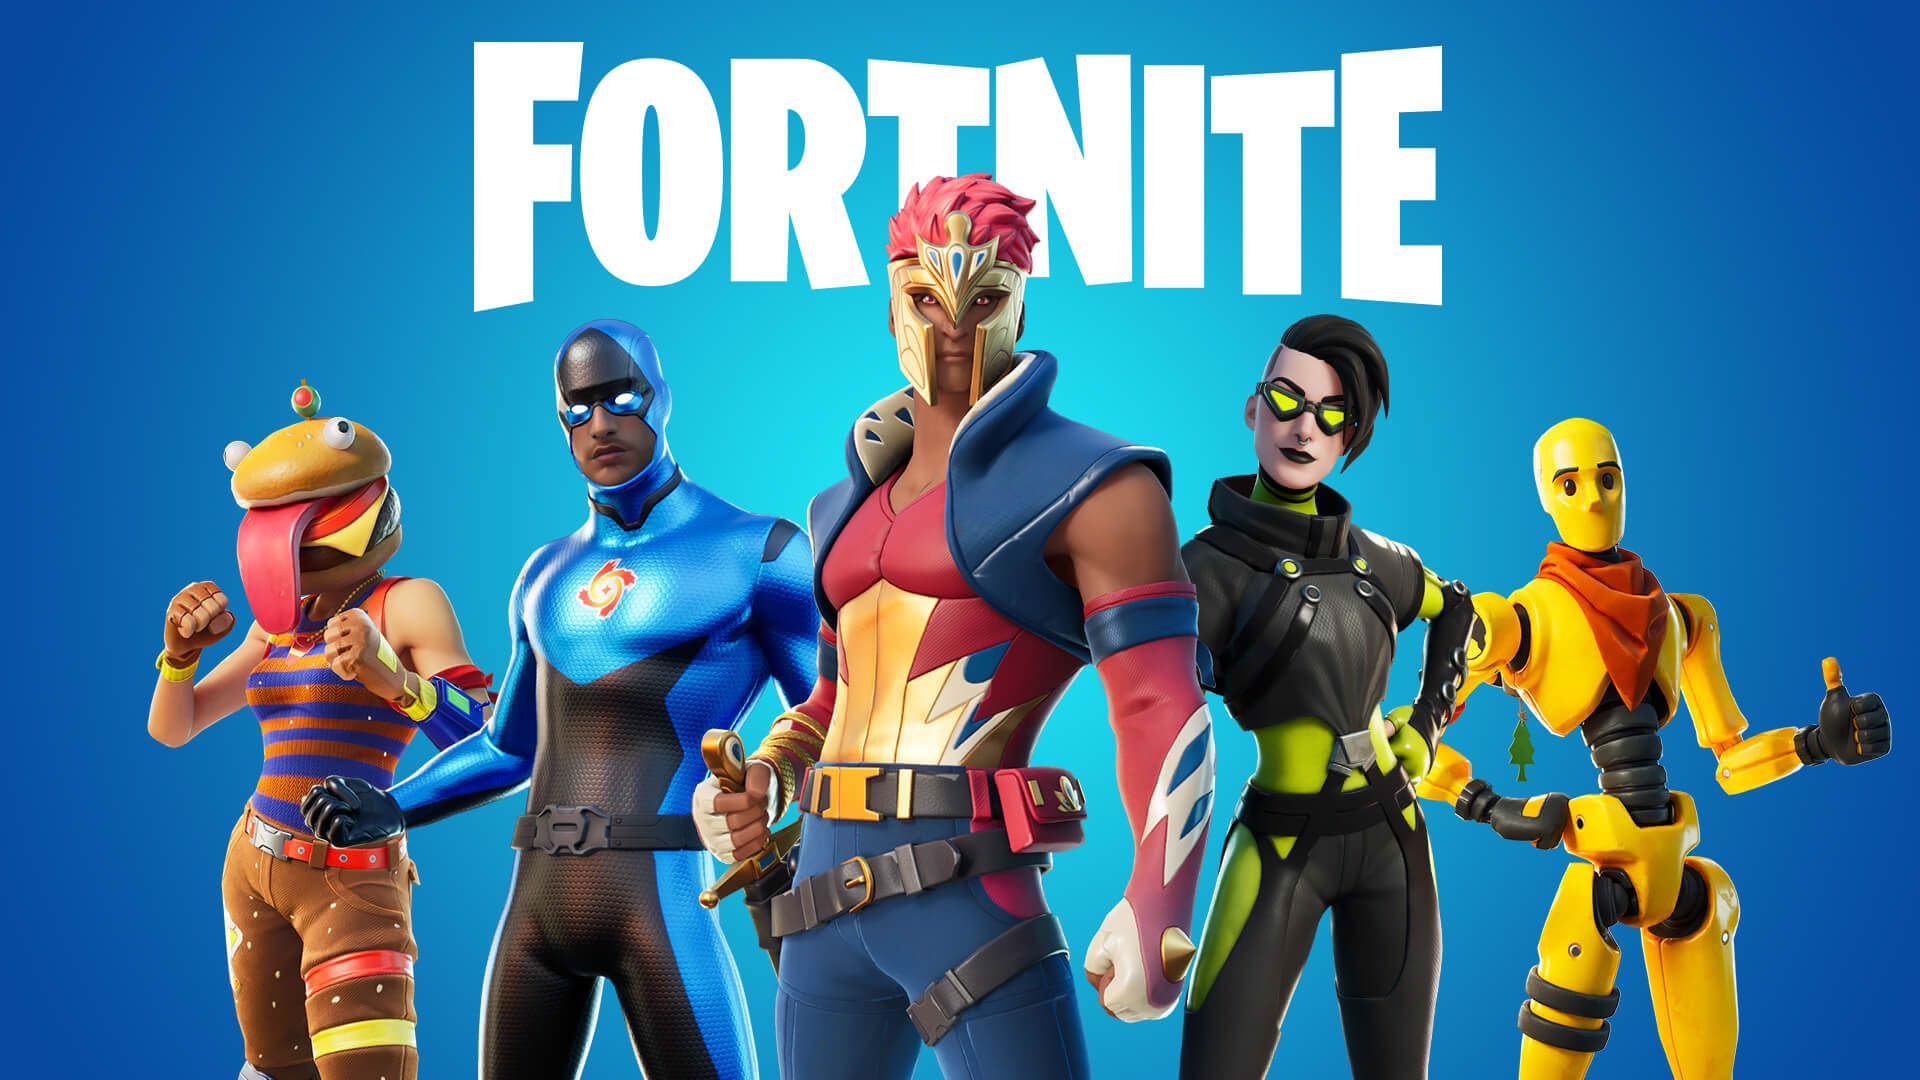 Different Fortnite game clothes